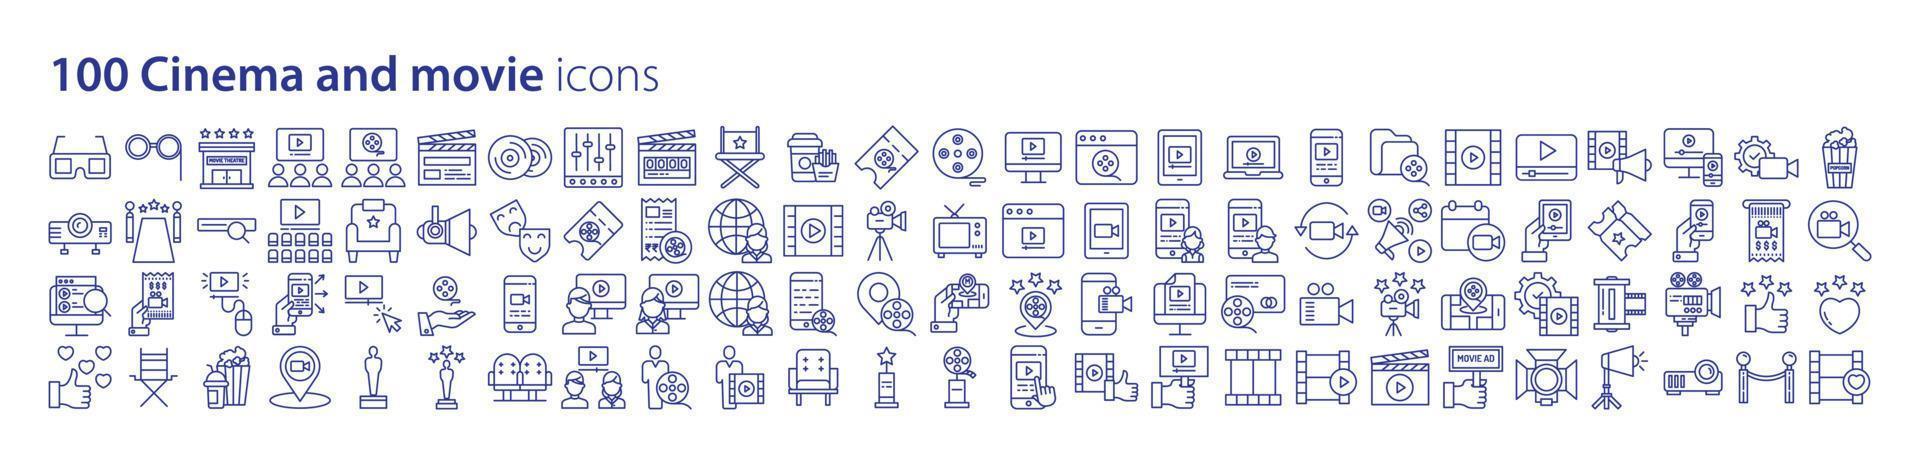 Collection of icons related to Cinema and movie, including icons like movie theater, Movie Ticket, Reel, Director and more. vector illustrations, Pixel Perfect